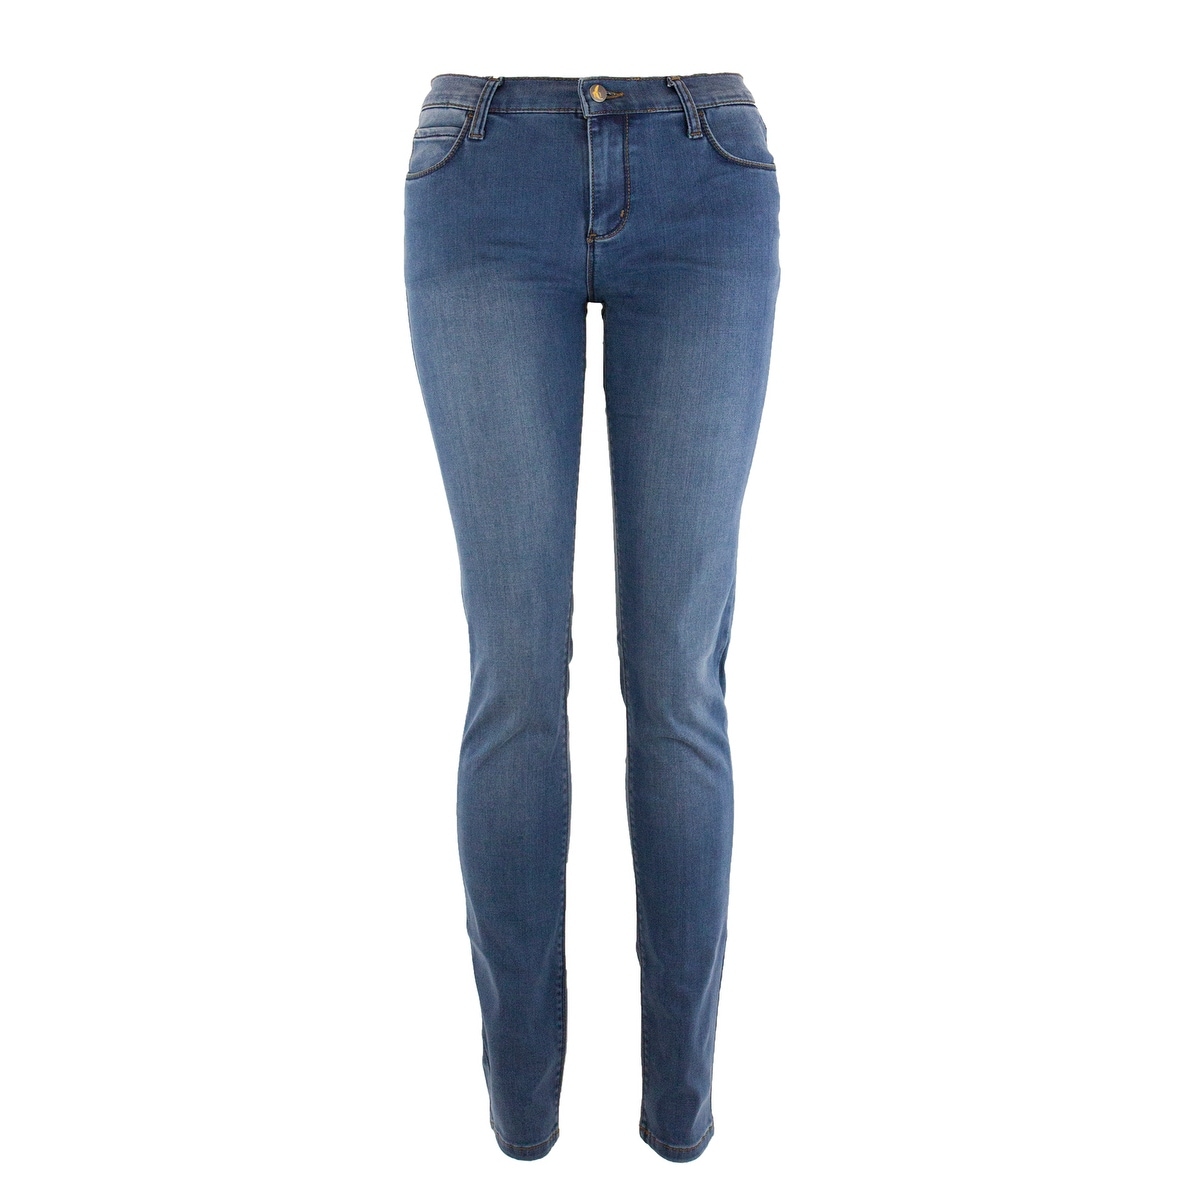 bamboo skinny jeans